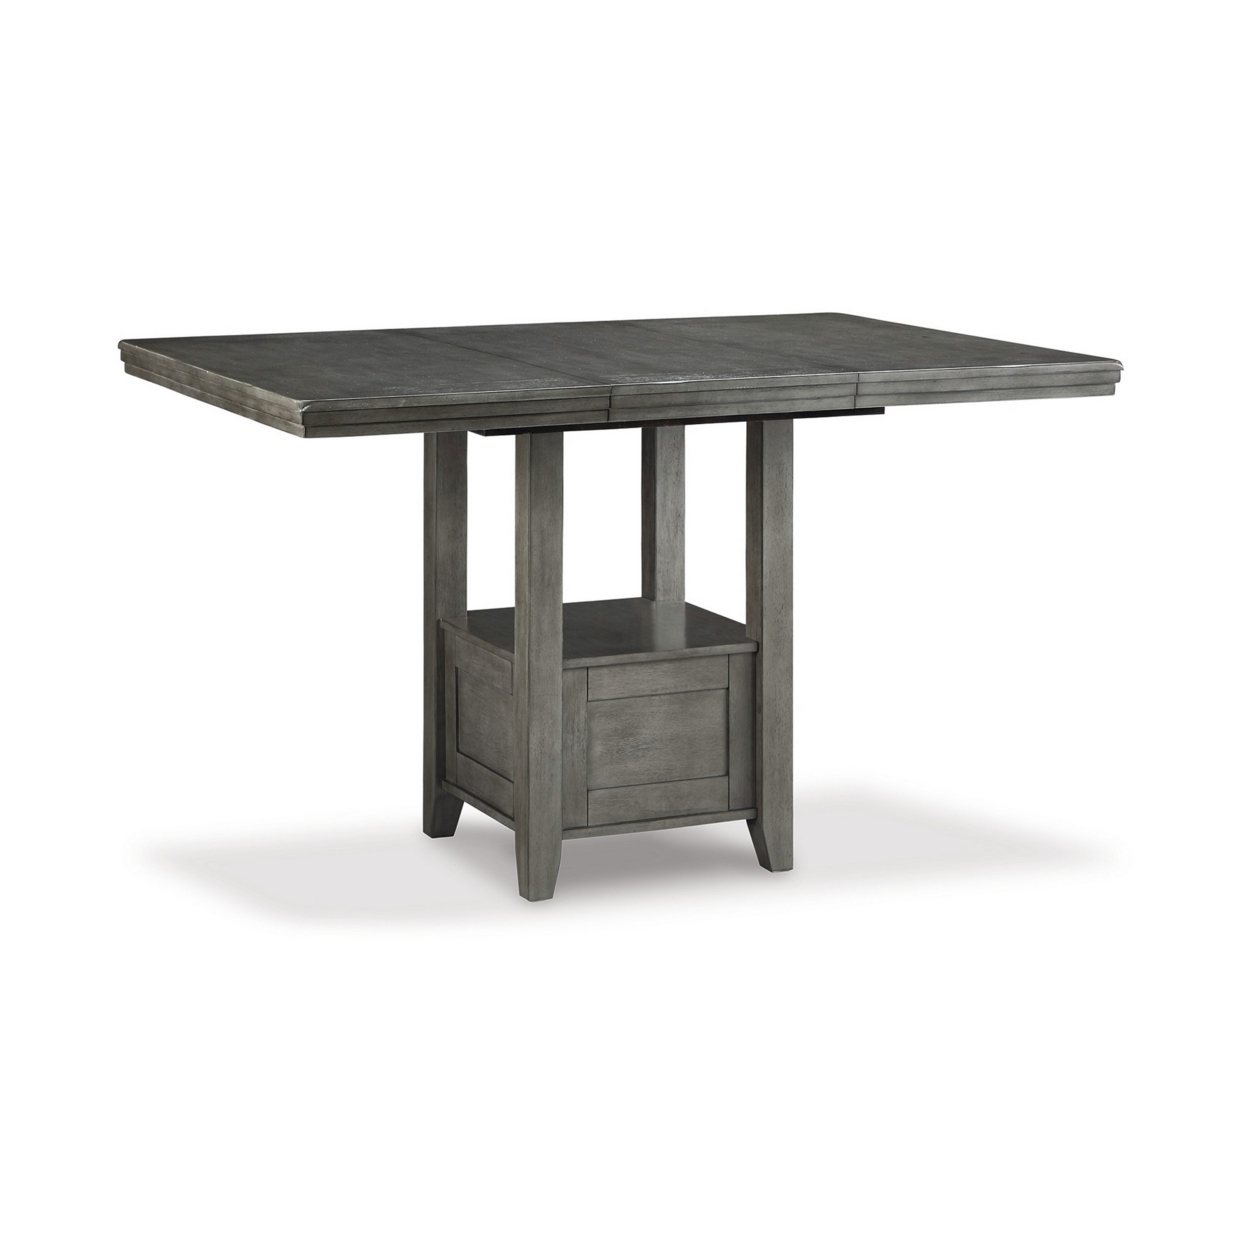 60 Inch Counter Height Table, Single Shelf, Extension Leaf, Weathered Gray- Saltoro Sherpi